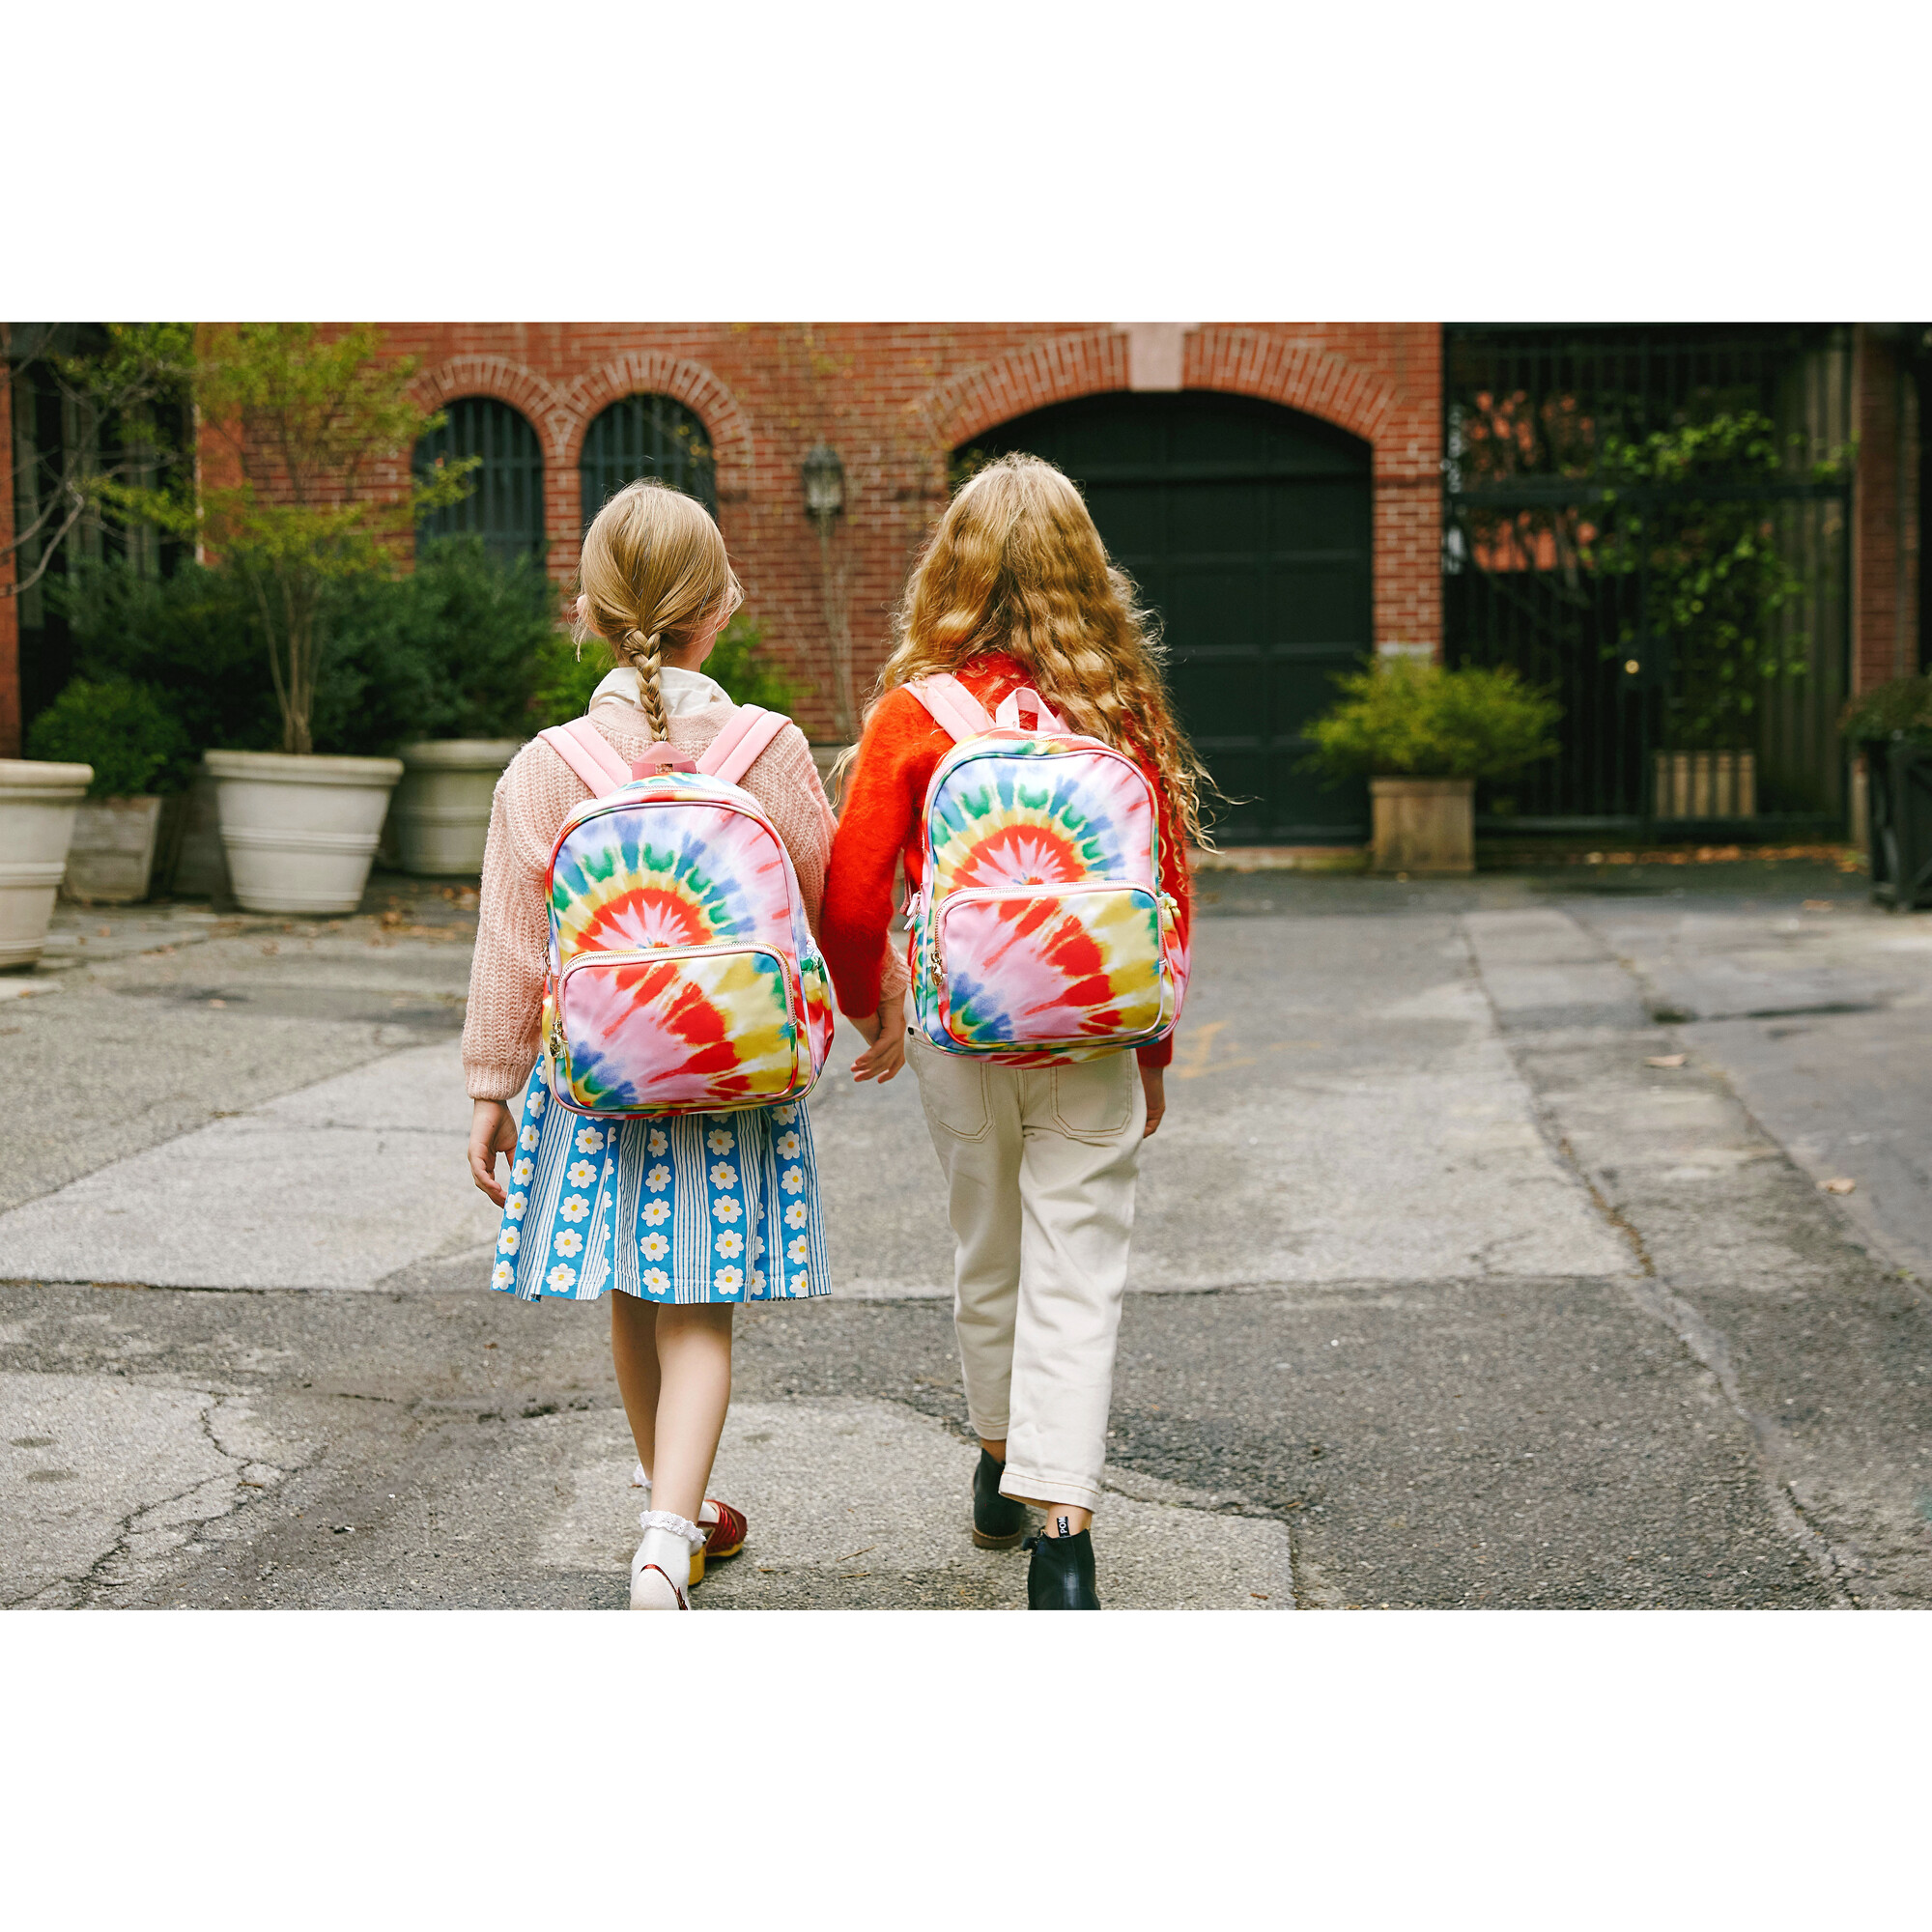 Exclusive* Tie Dye Mini Backpack - Stoney Clover Lane Bags & Luggage